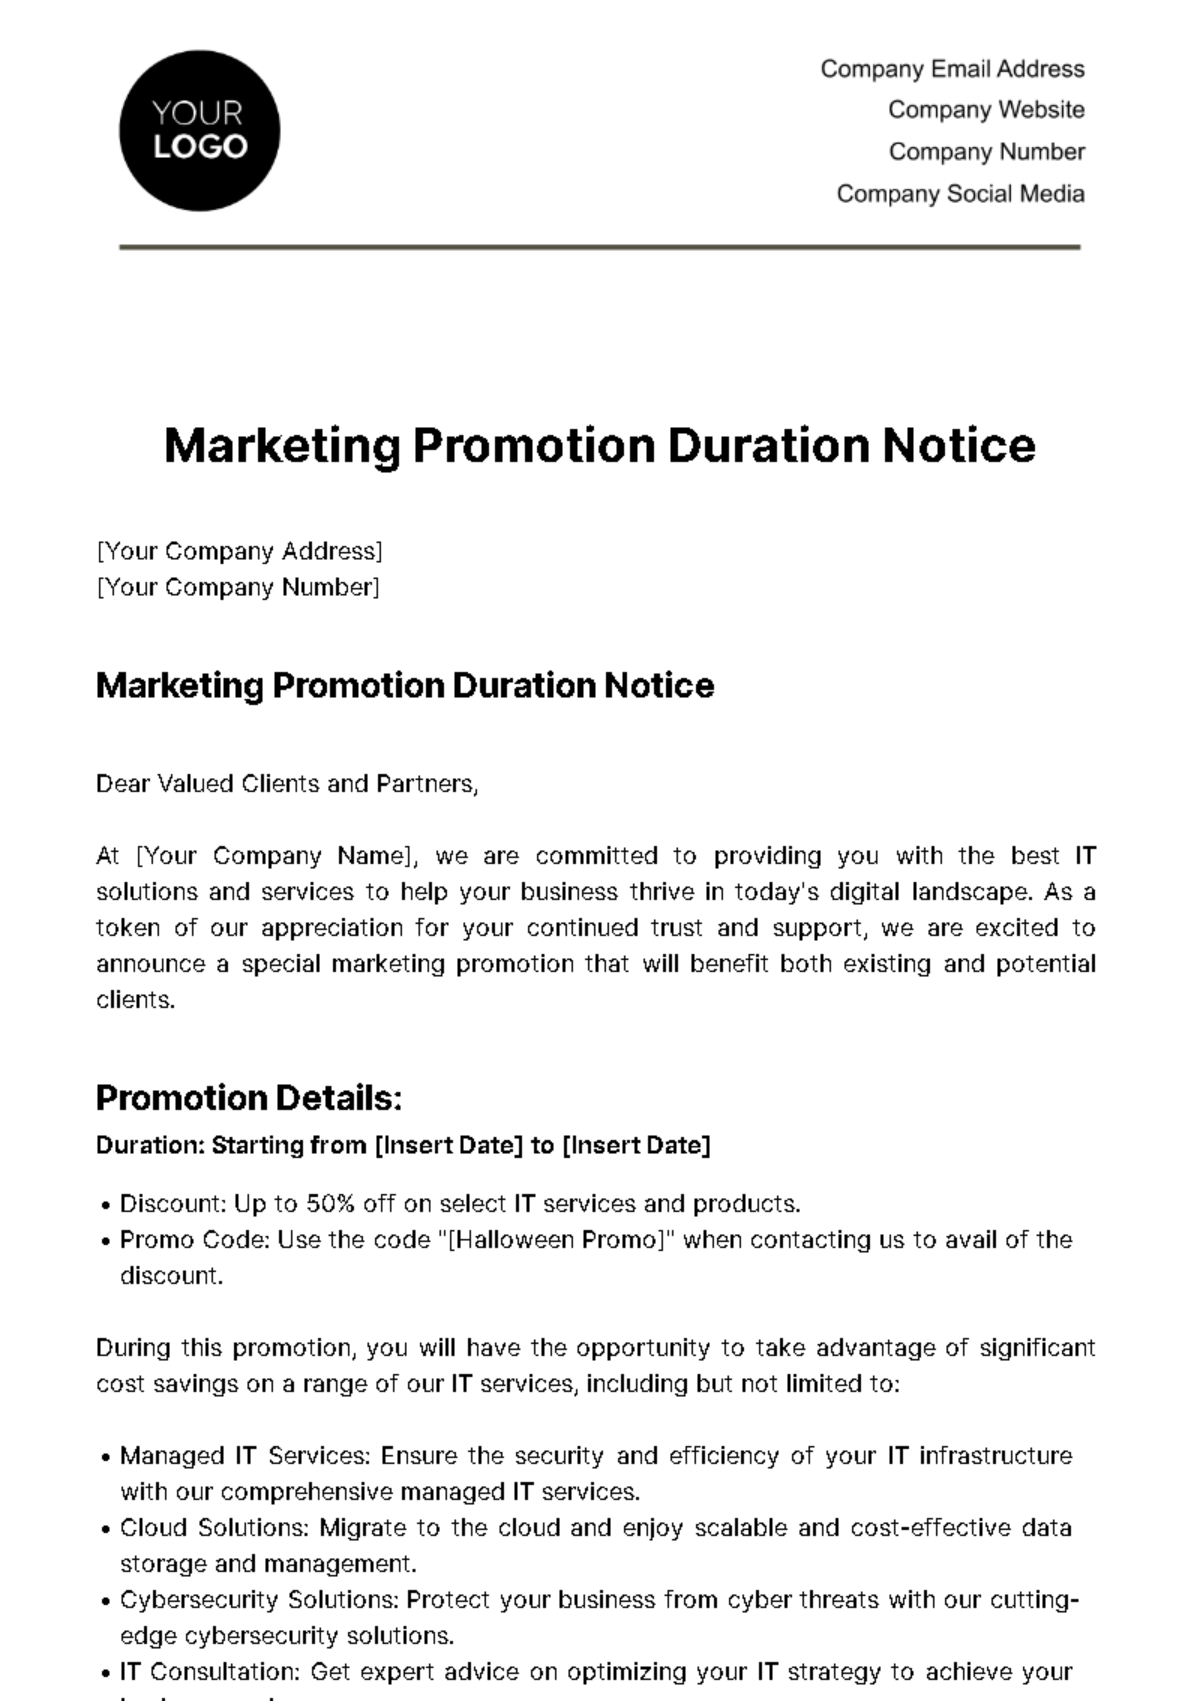 Free Marketing Promotion Duration Notice Template